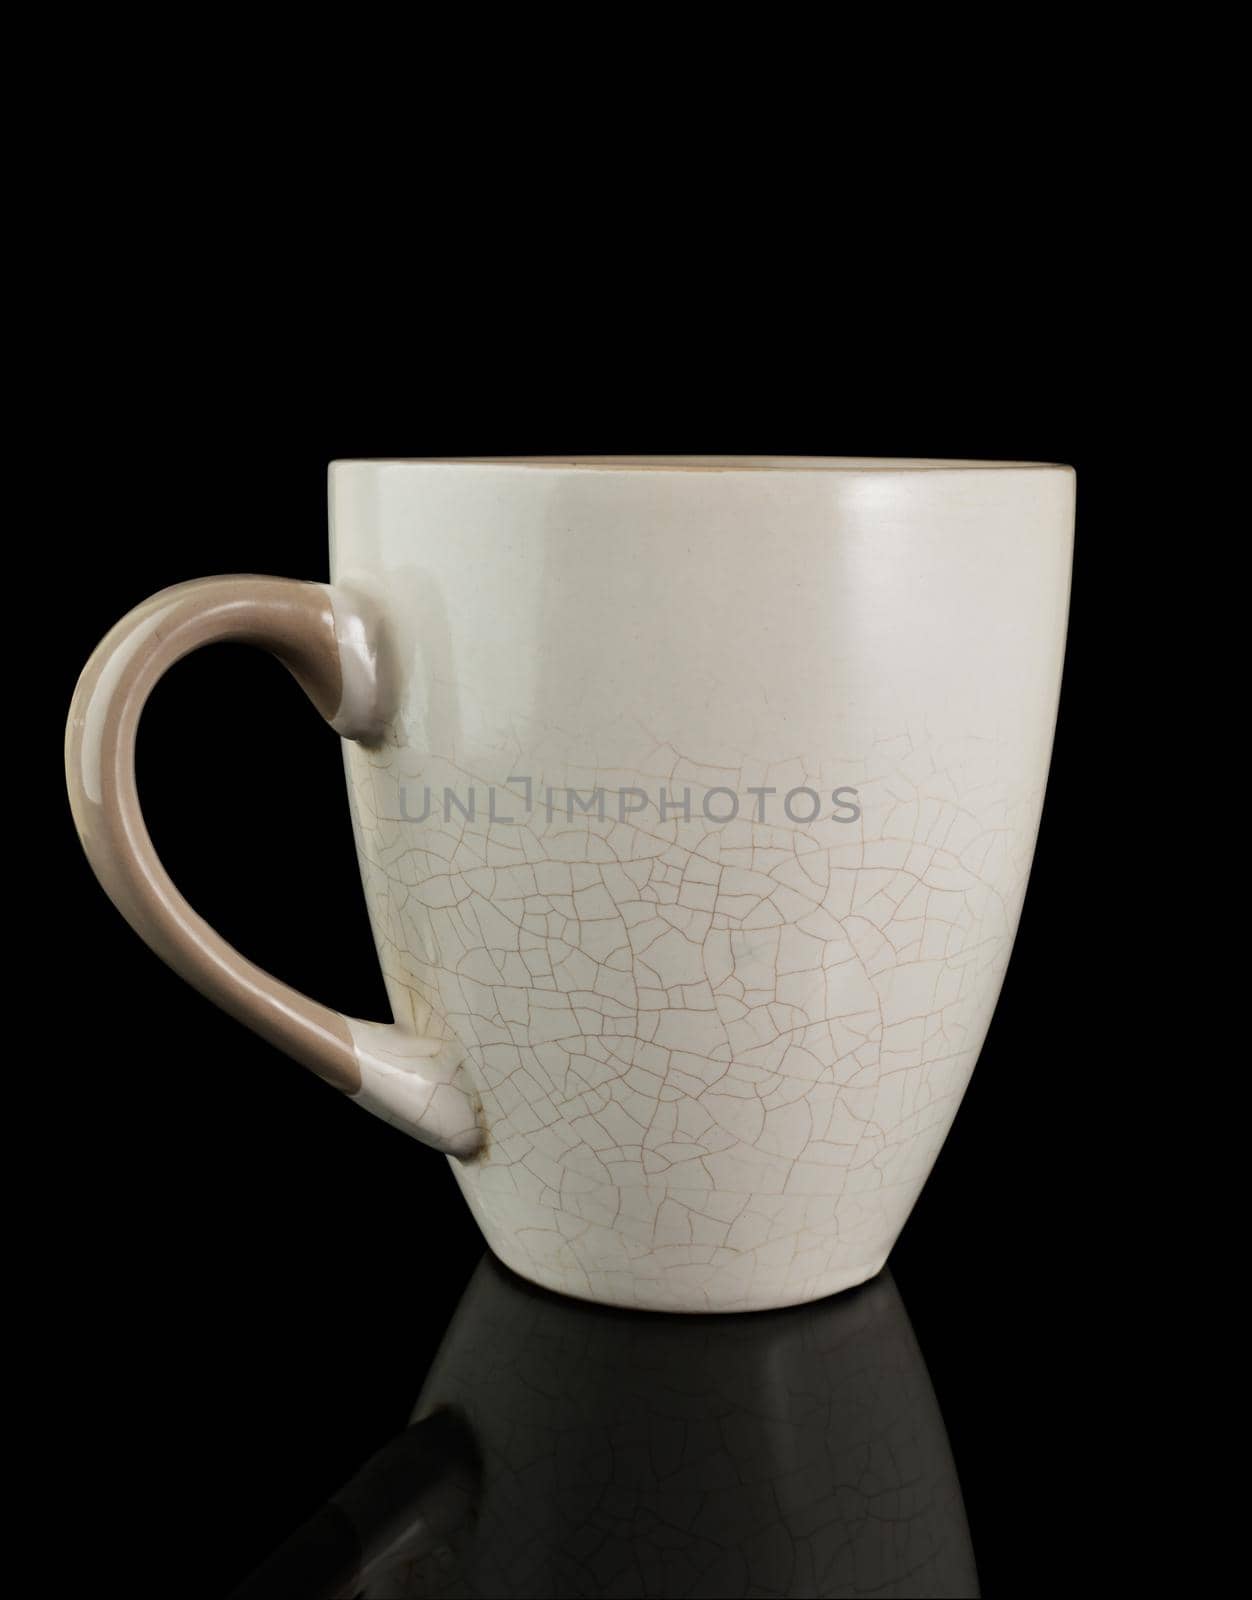 Mug with cracked walls, on a black background with reflection